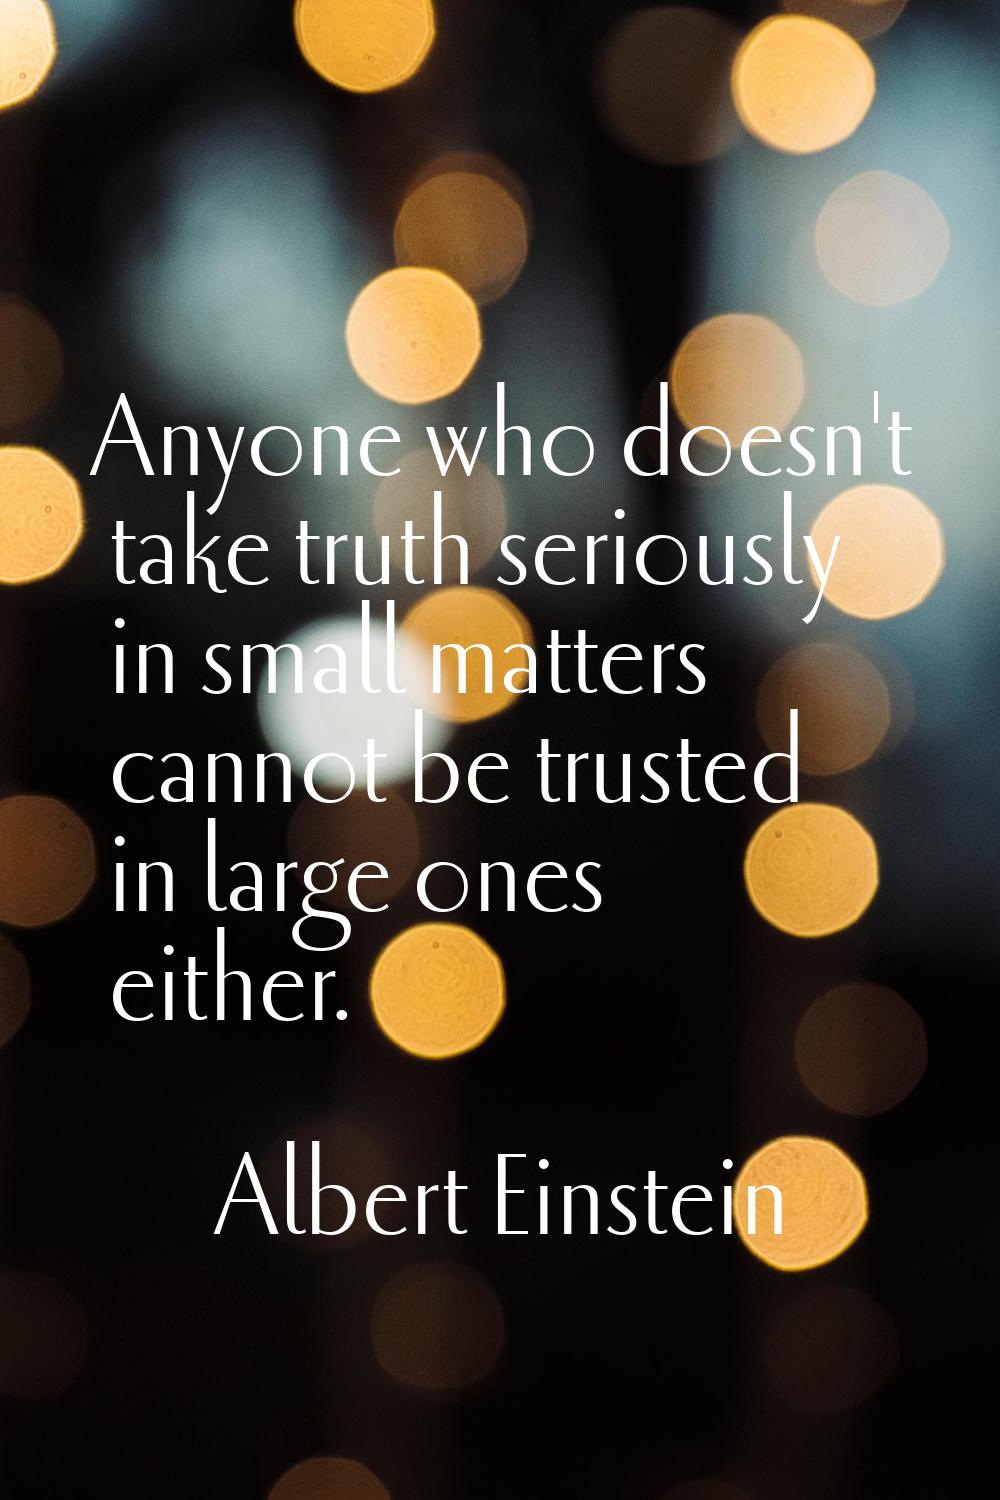 Anyone who doesn't take truth seriously in small matters cannot be trusted in large ones either.